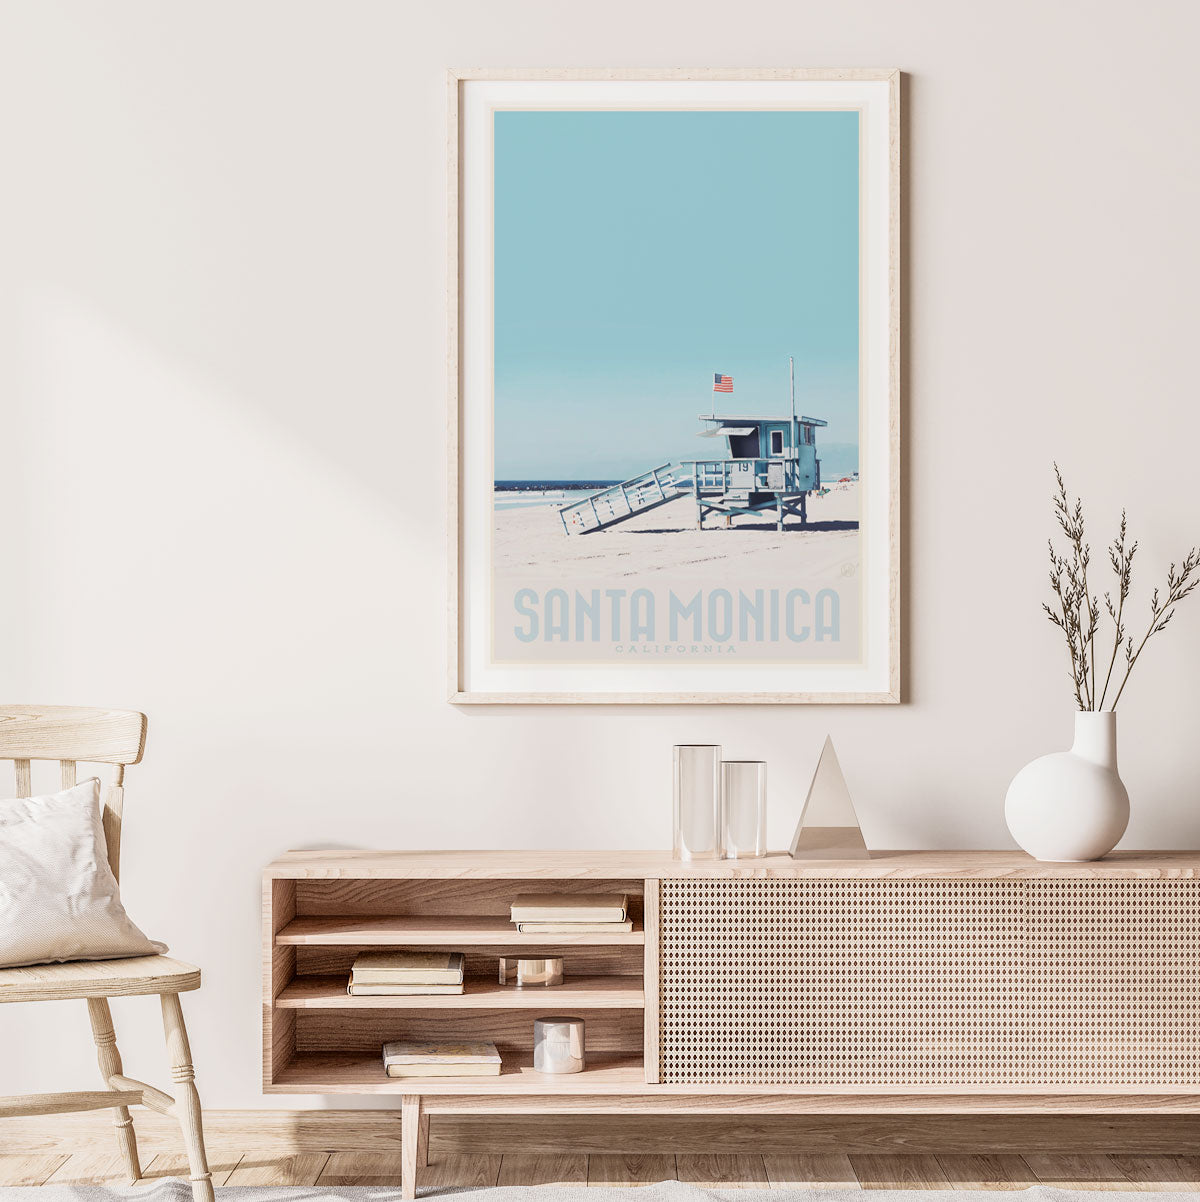 Santa Monica California vintage travel style poster by Placesweluv